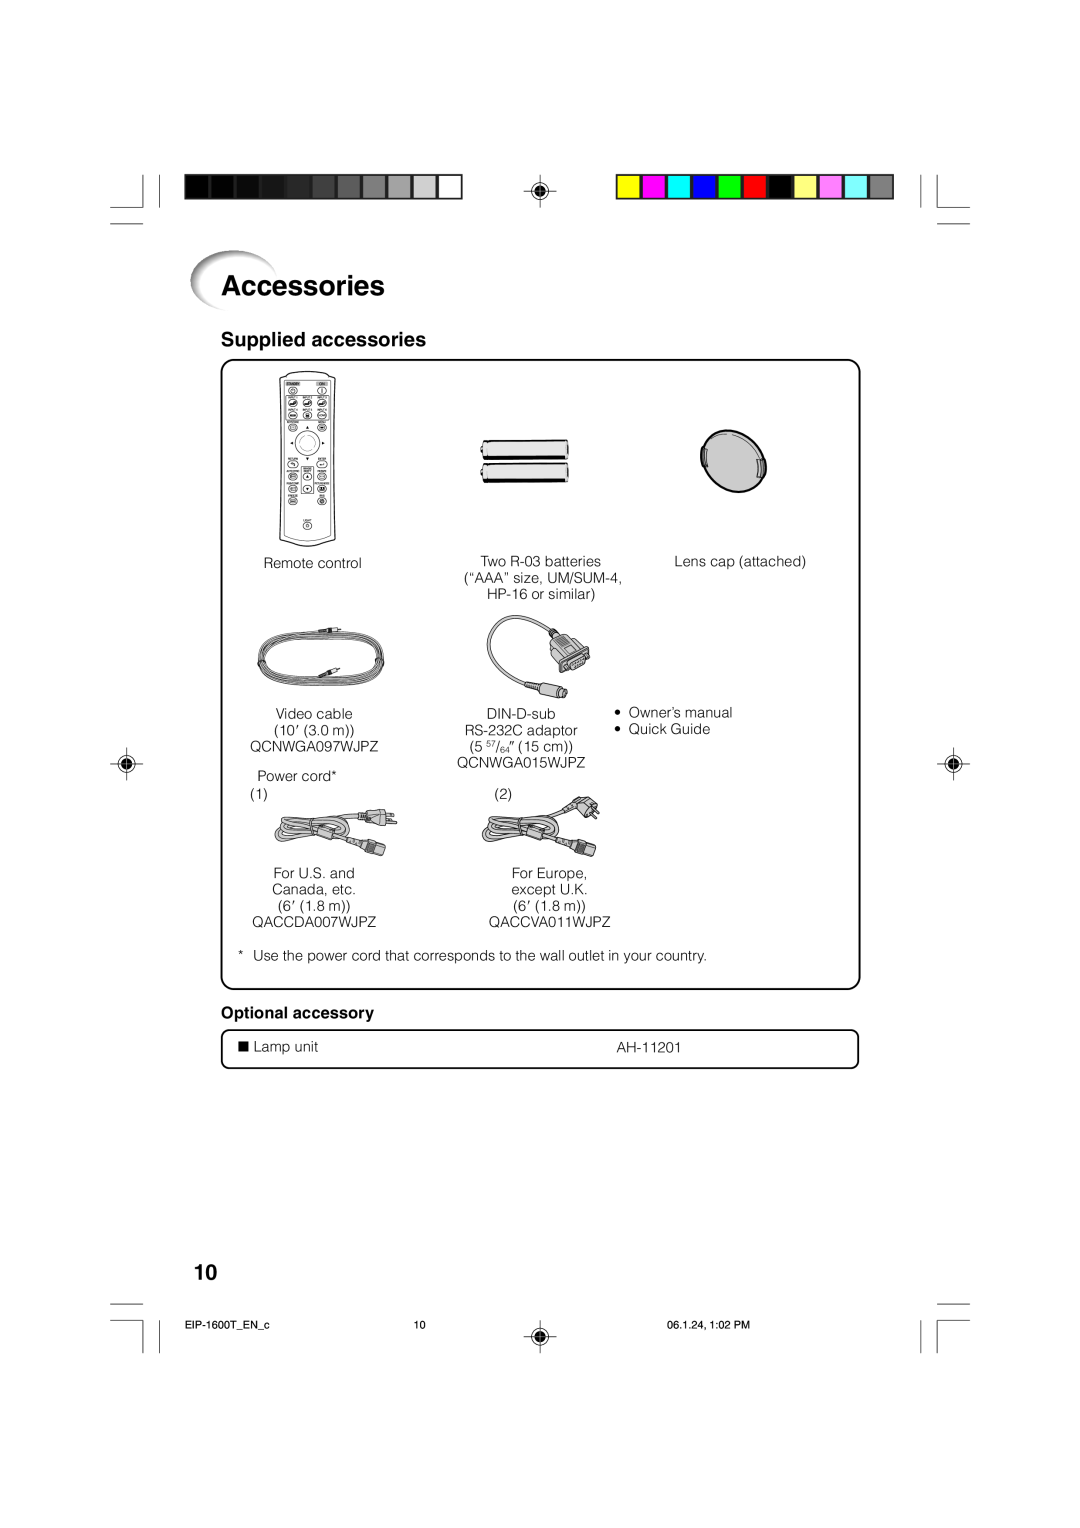 Eiki EIP-1600T owner manual Accessories, Supplied accessories, Optional accessory 